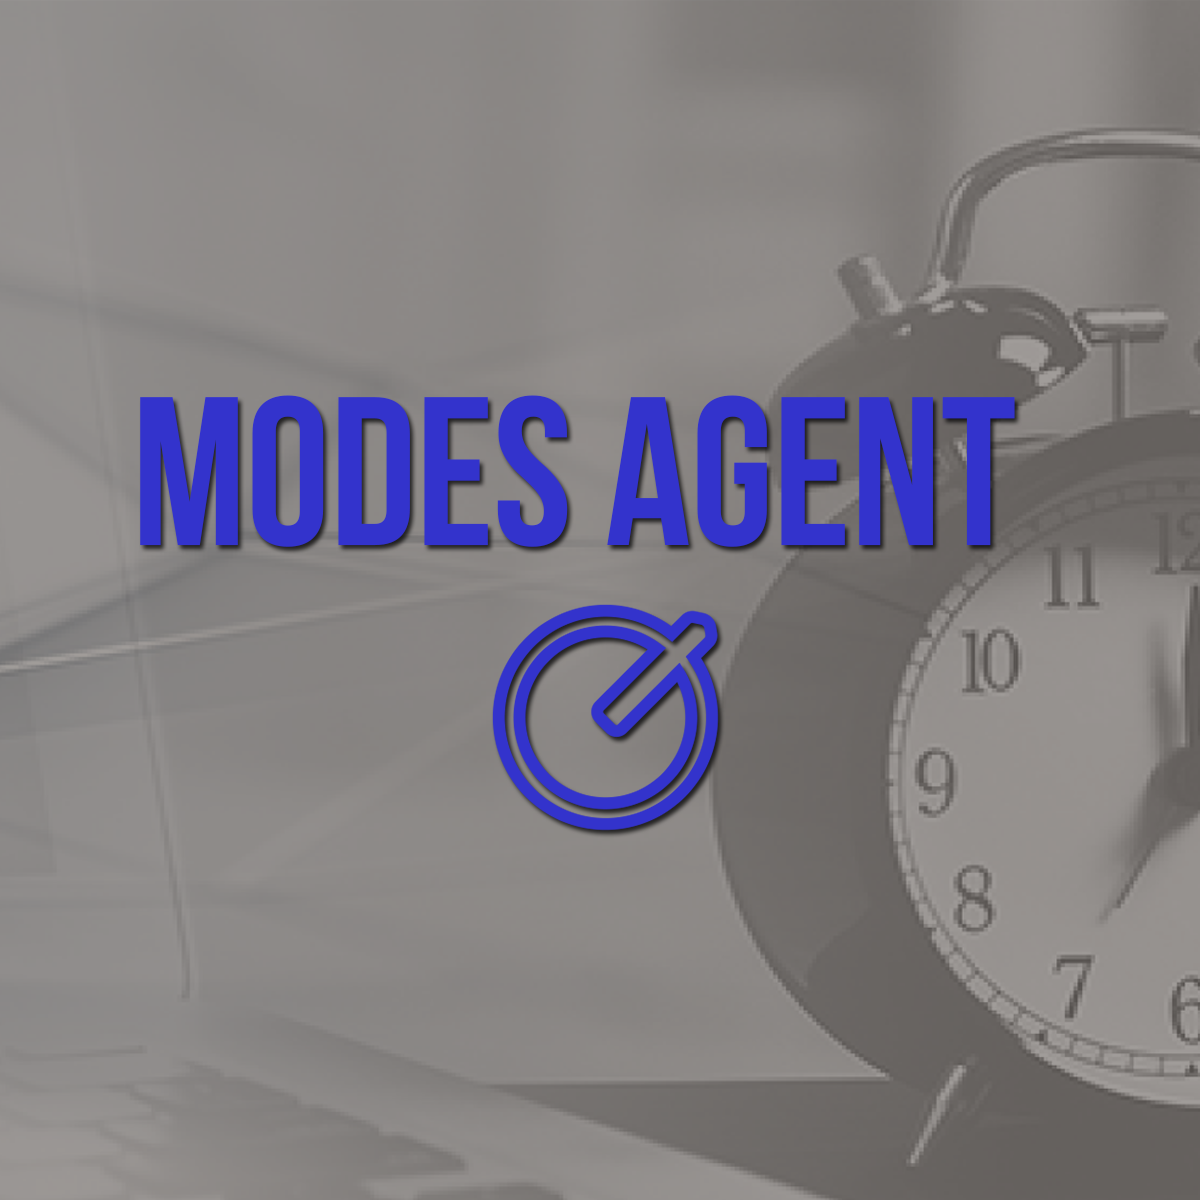 Modes Agent.png